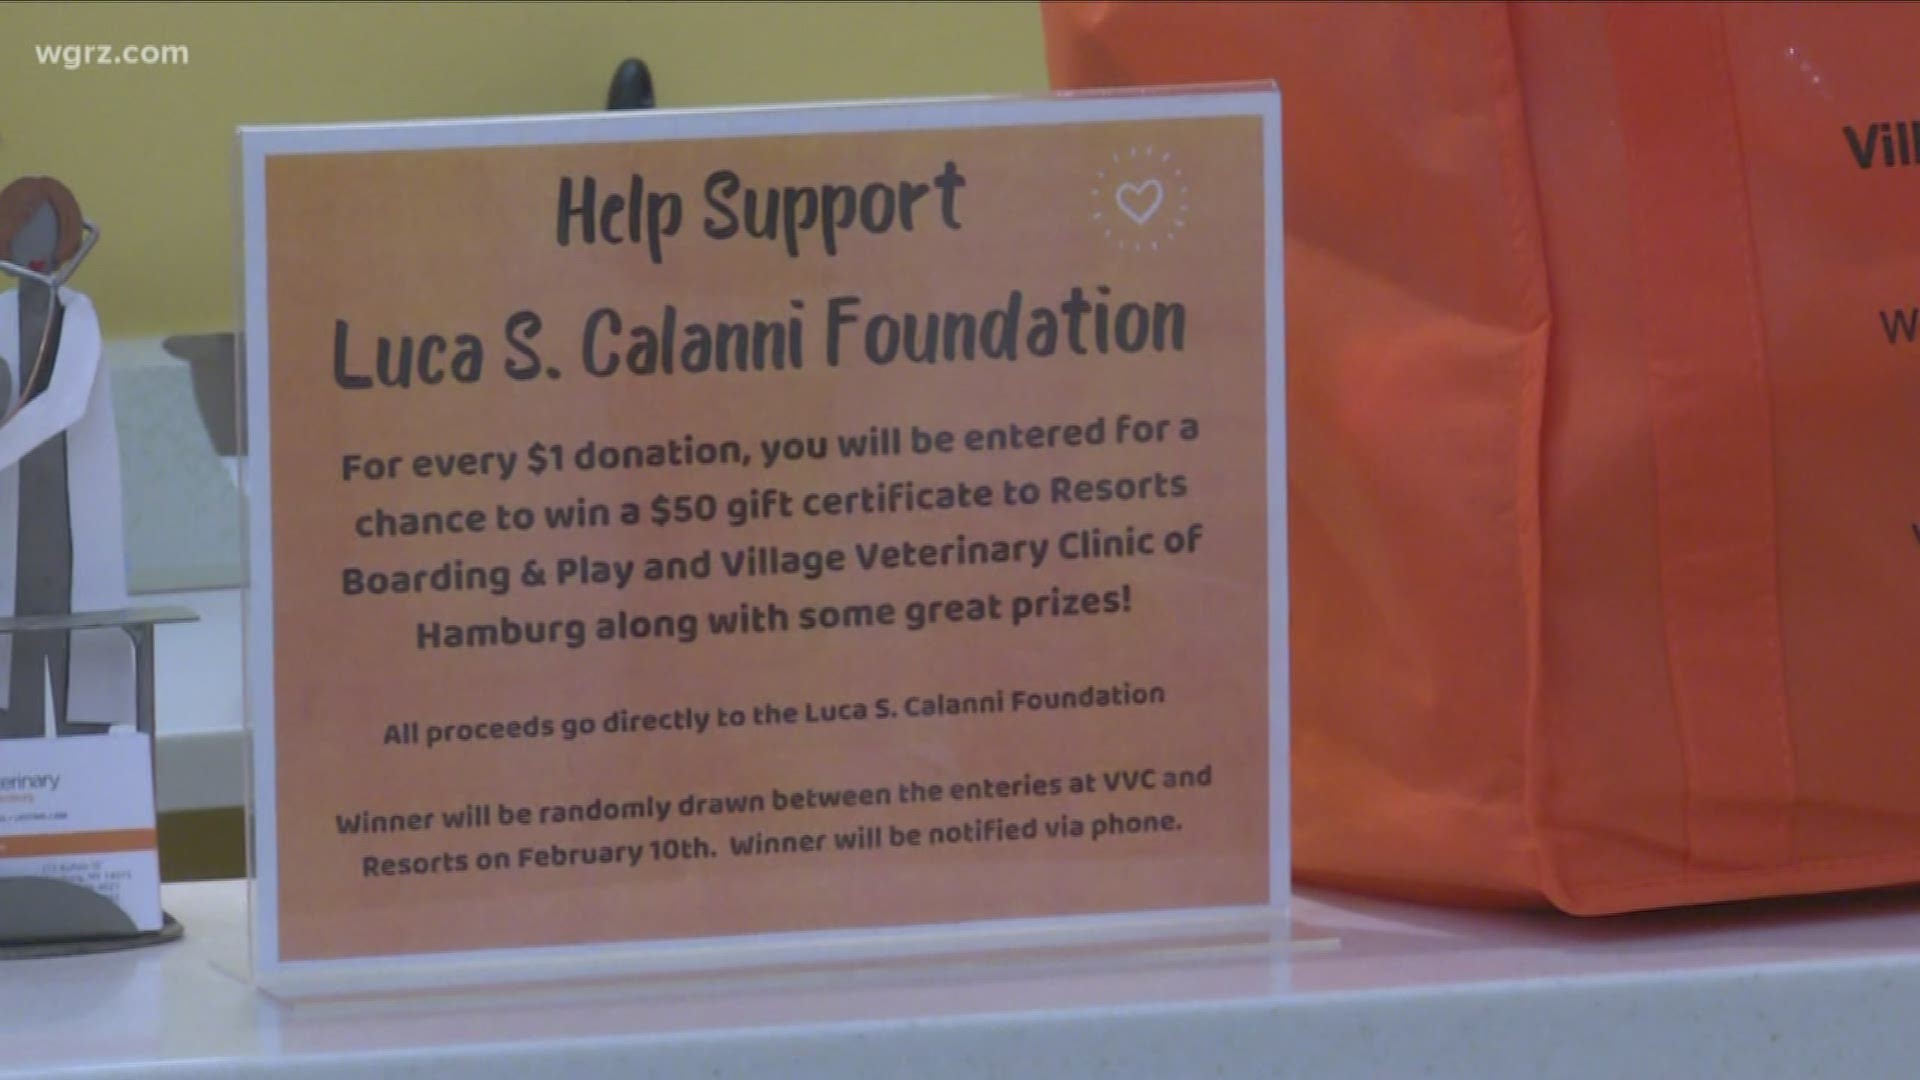 A countless number of local businesses are all doing something special to raise money for the foundation in Luca's name.